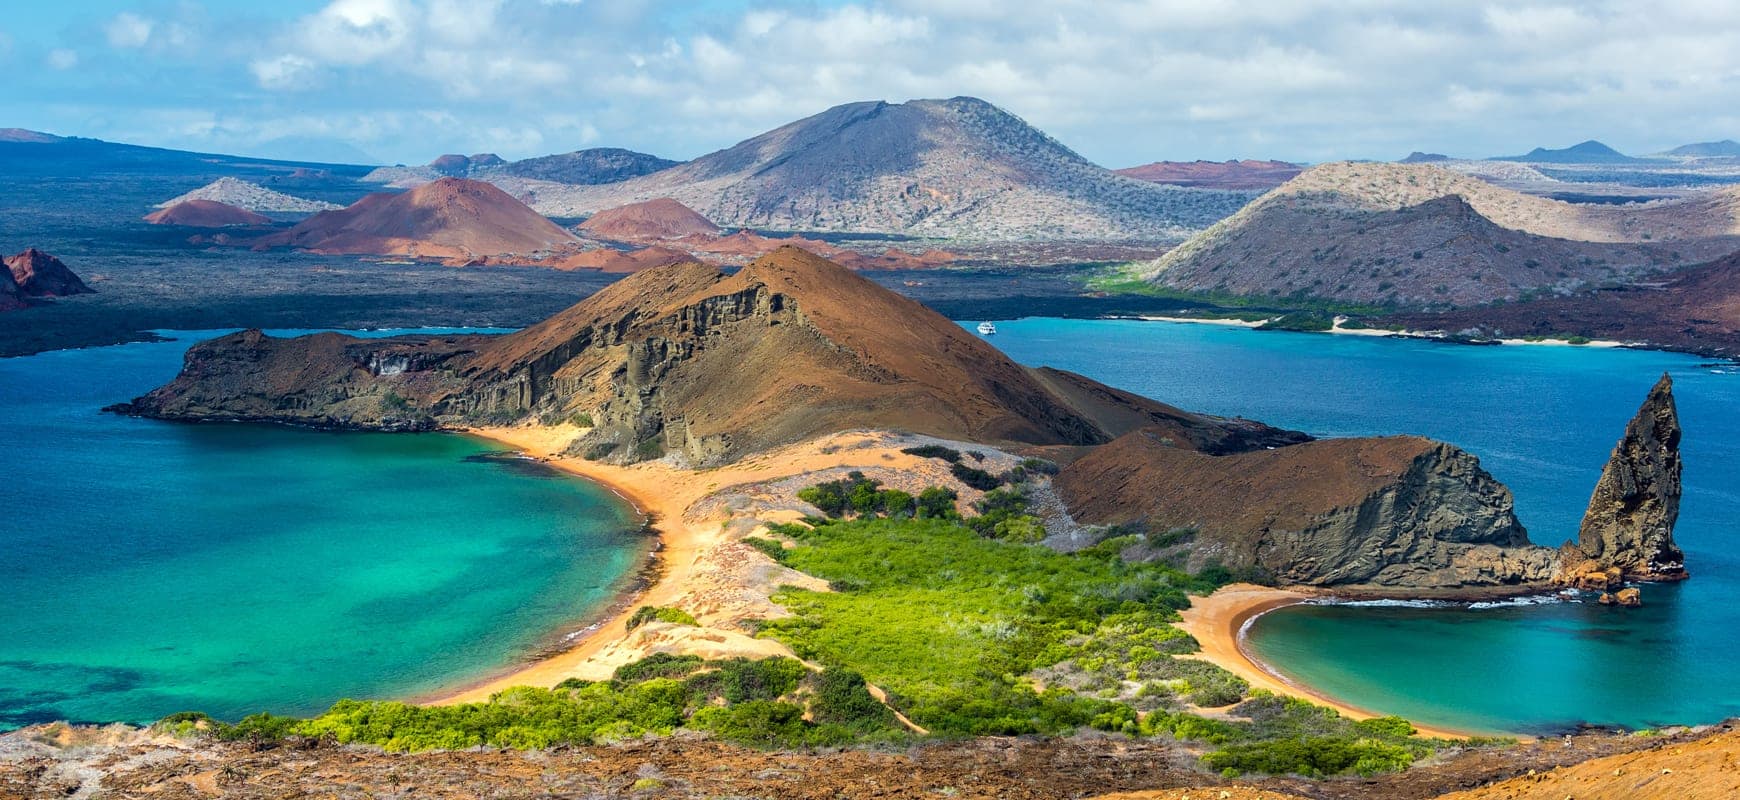 Immersioni alle Galapagos